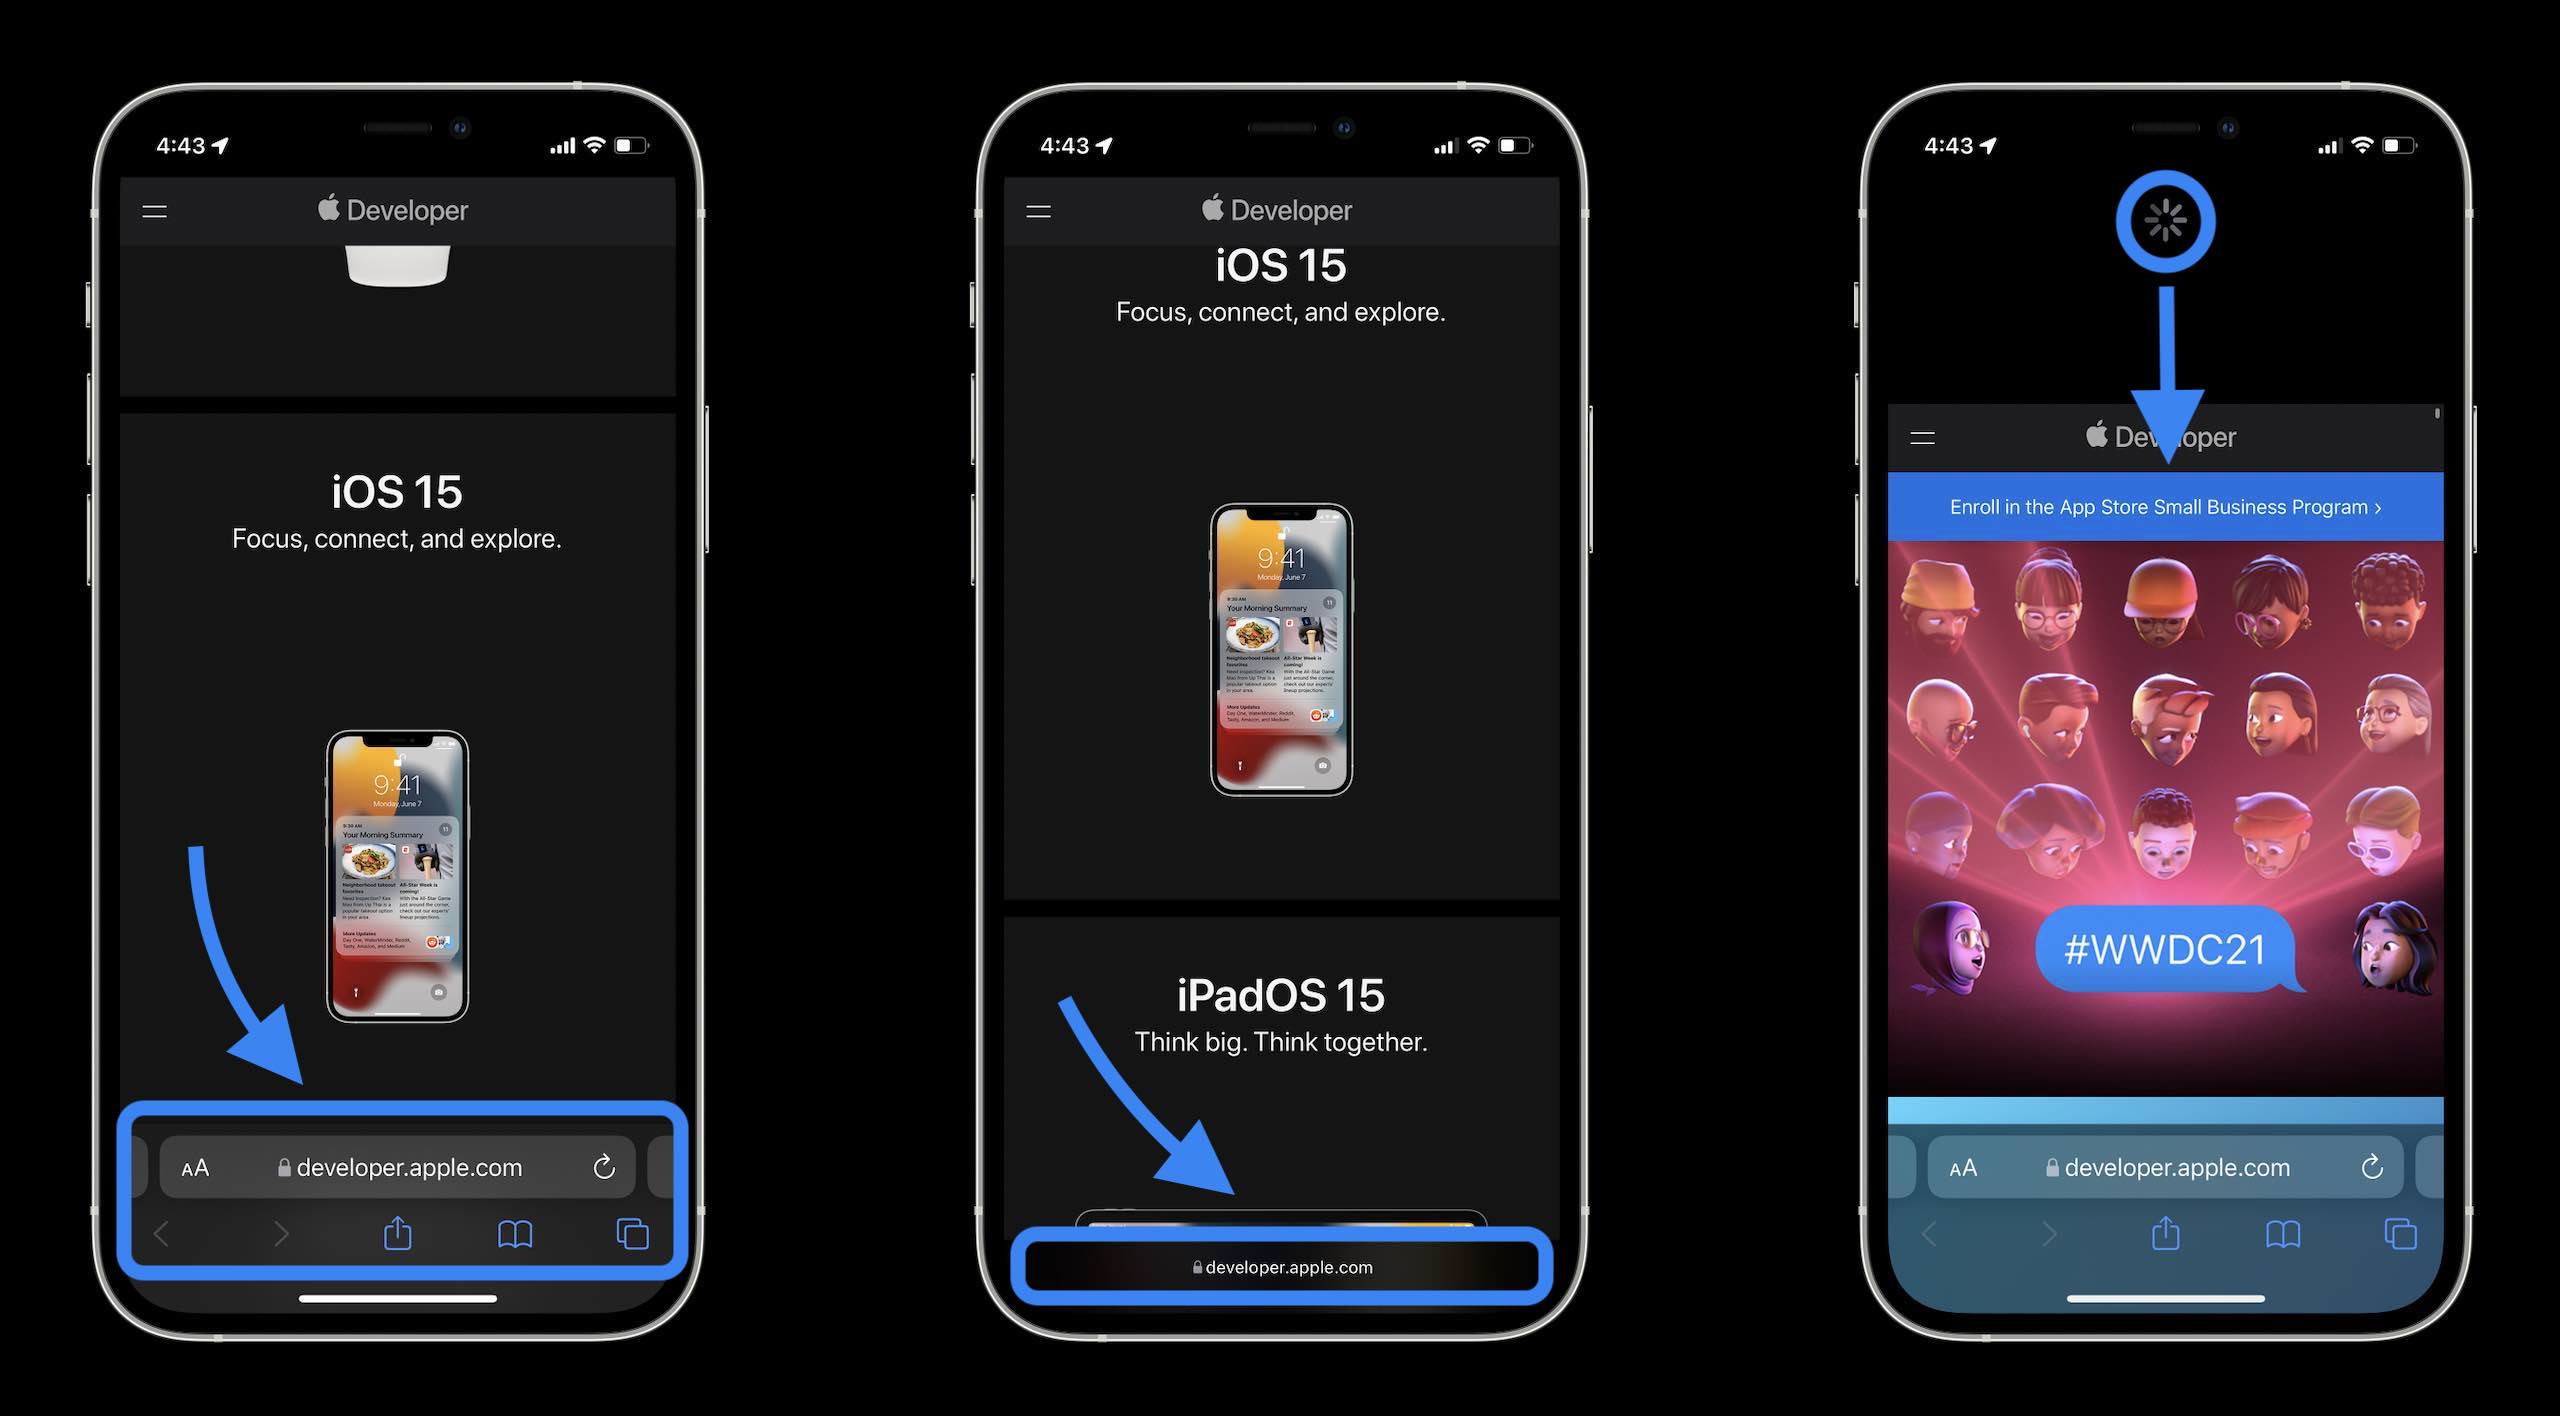 How Safari in iOS 15 works layout and navigation - tap search bar or swipe up on tab bar then tap the + icon to open a new